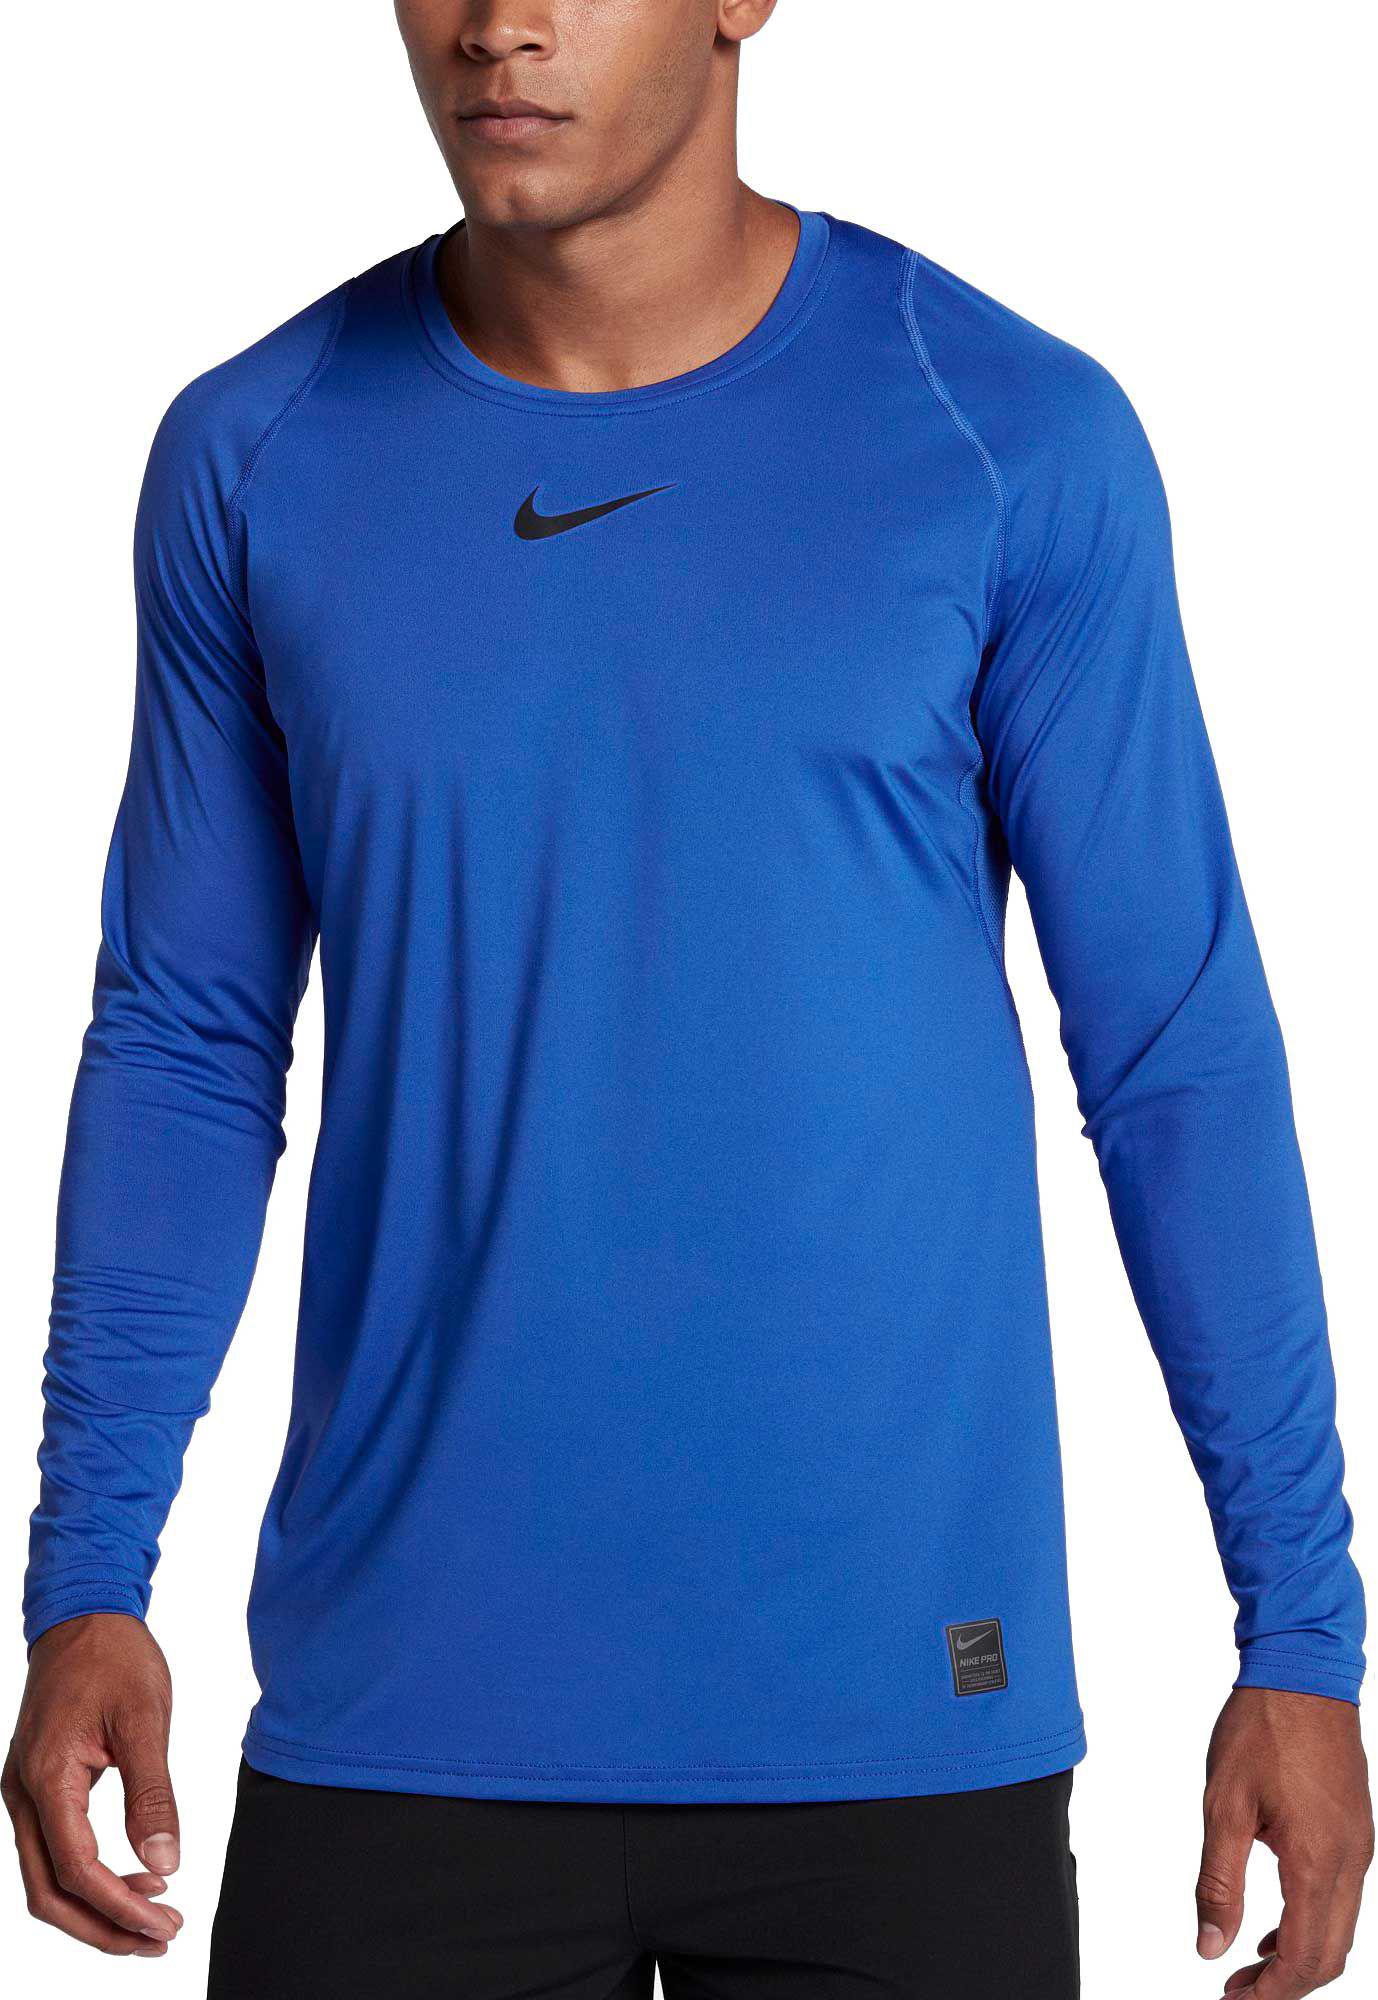 Nike Synthetic Pro Long Sleeve Fitted Shirt in Black for Men - Lyst